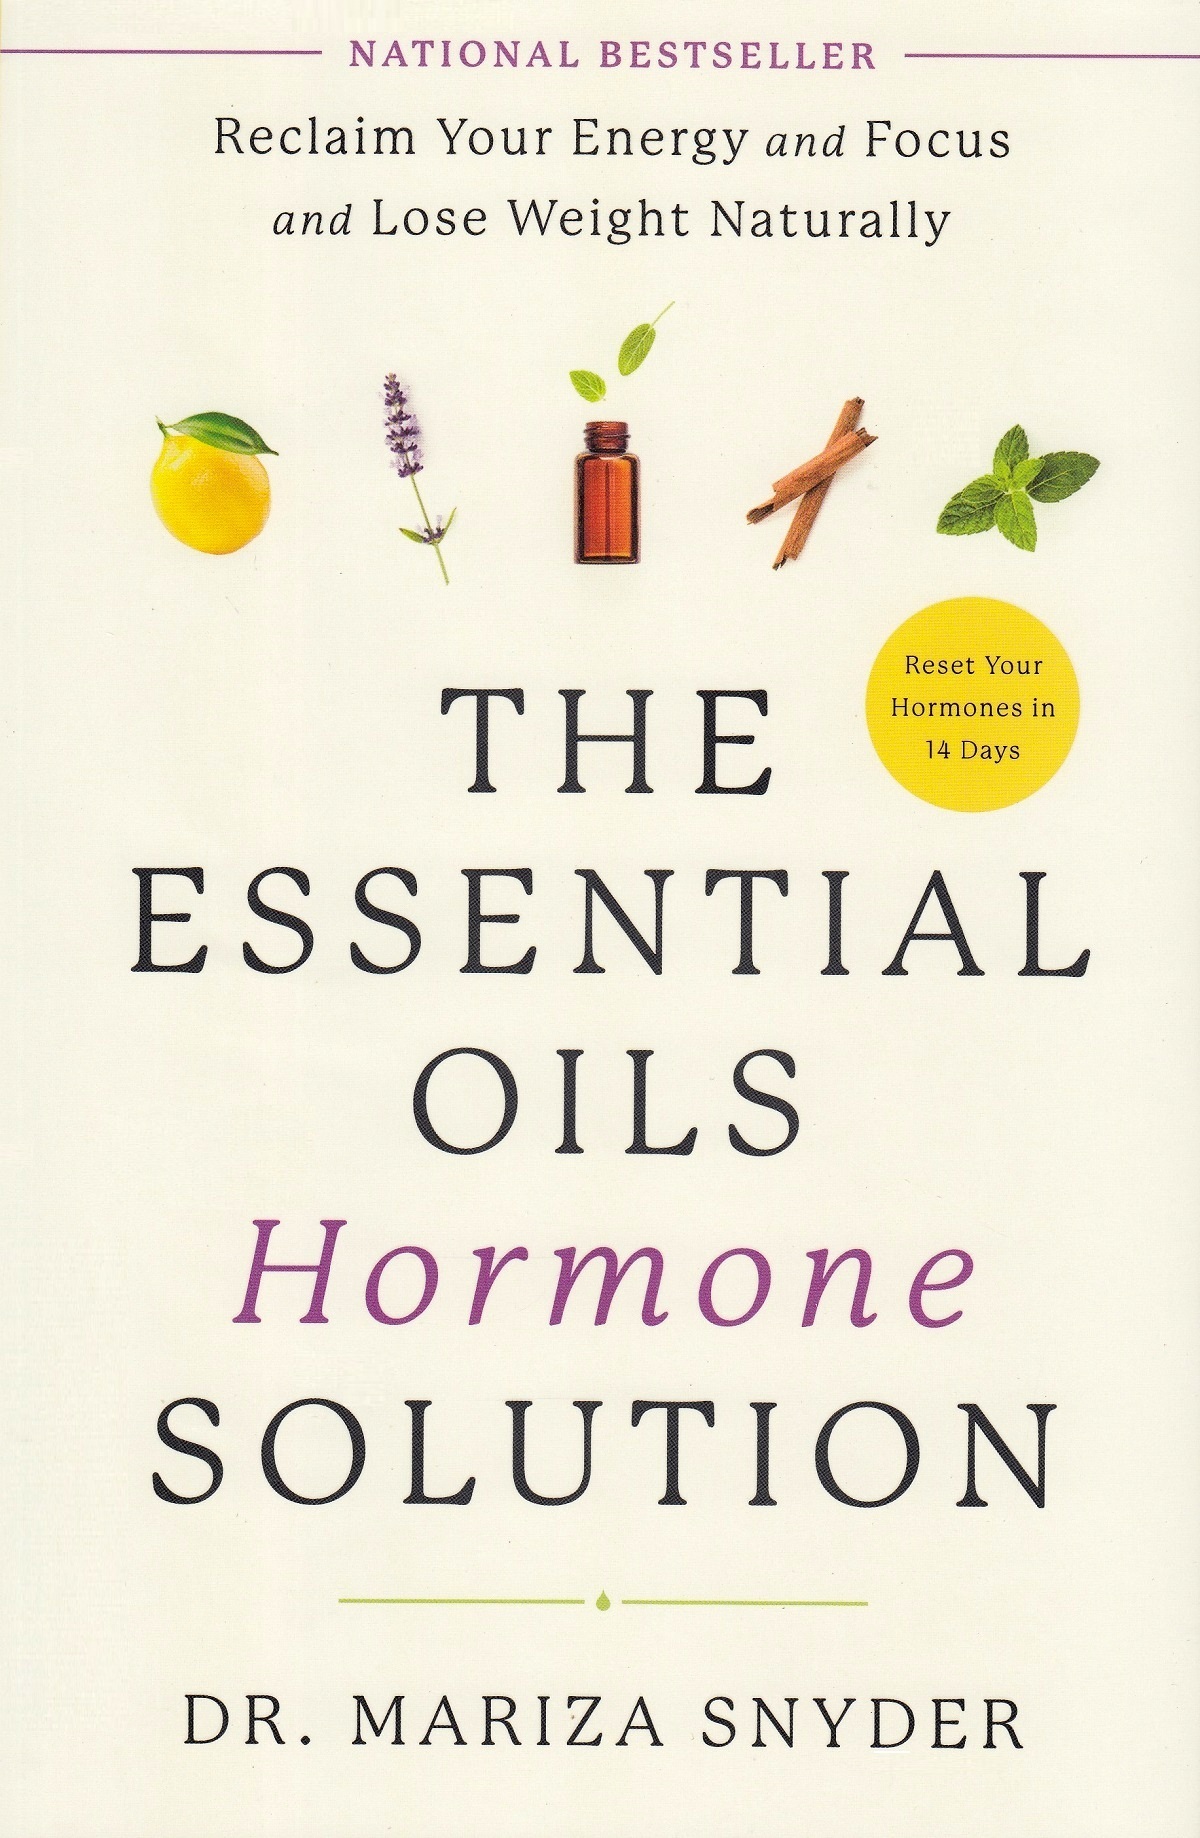 The Essential Oils Hormone Solution - Dr. Mariza Snyder